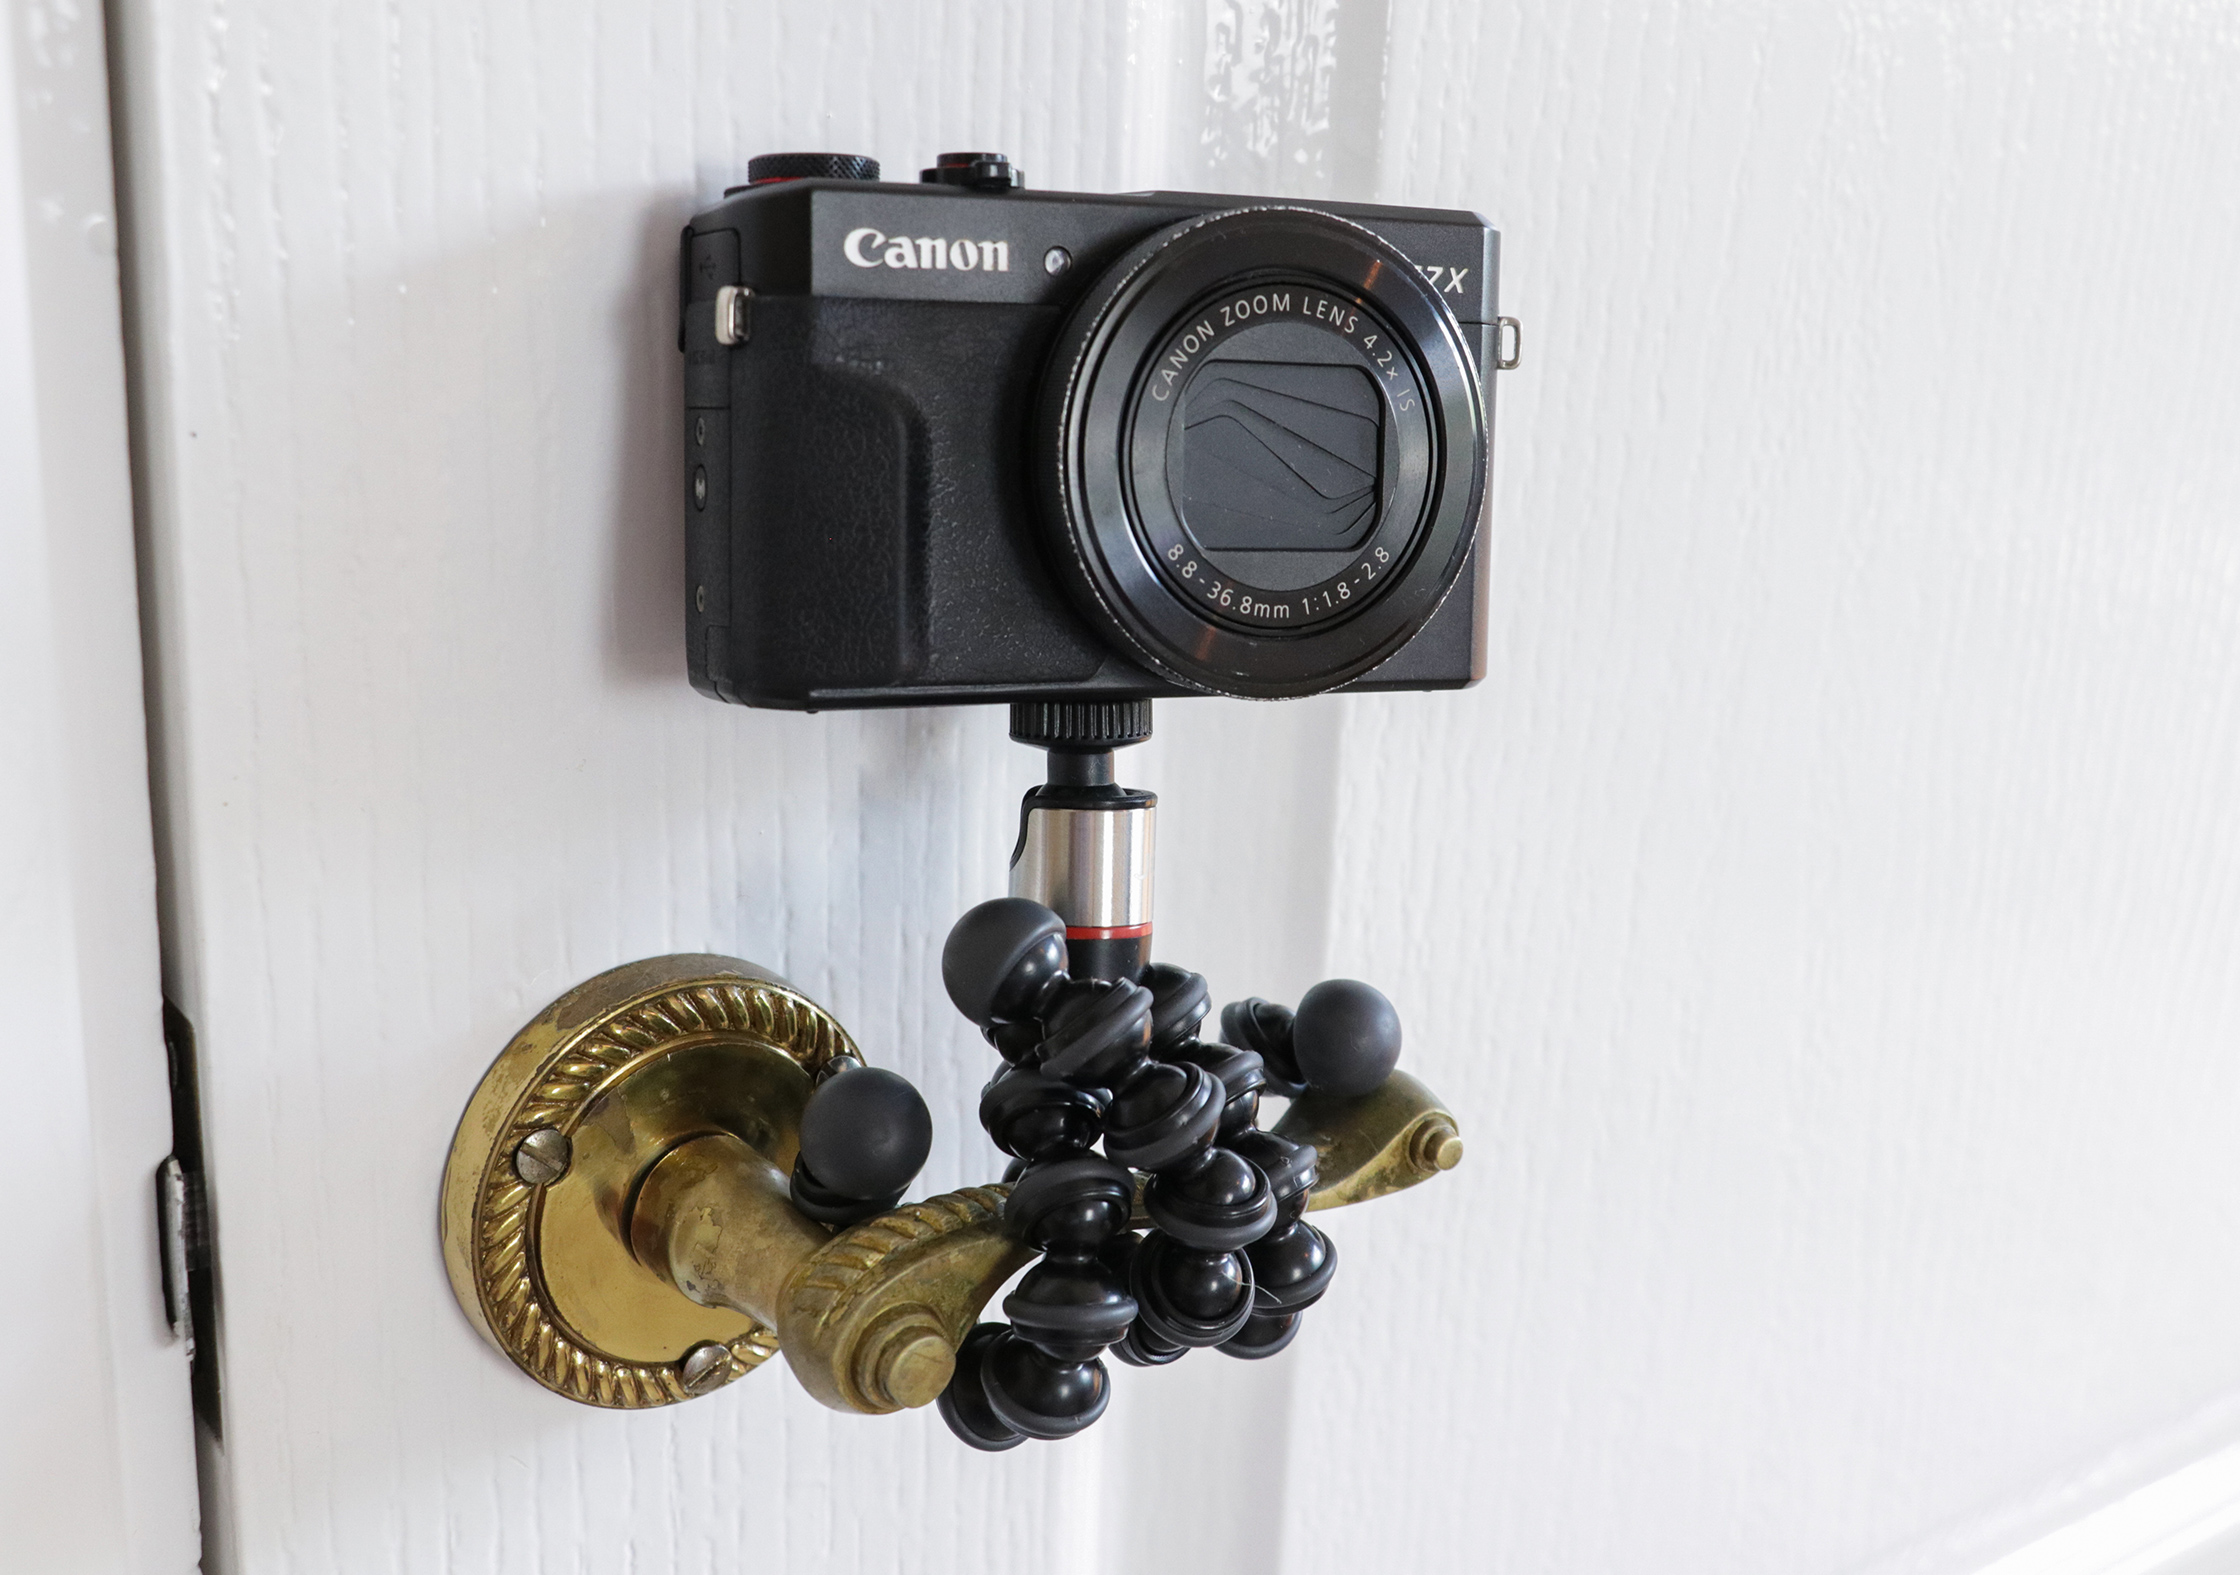 Using The JOBY GorillaPod 325 As A Wrapping Mount